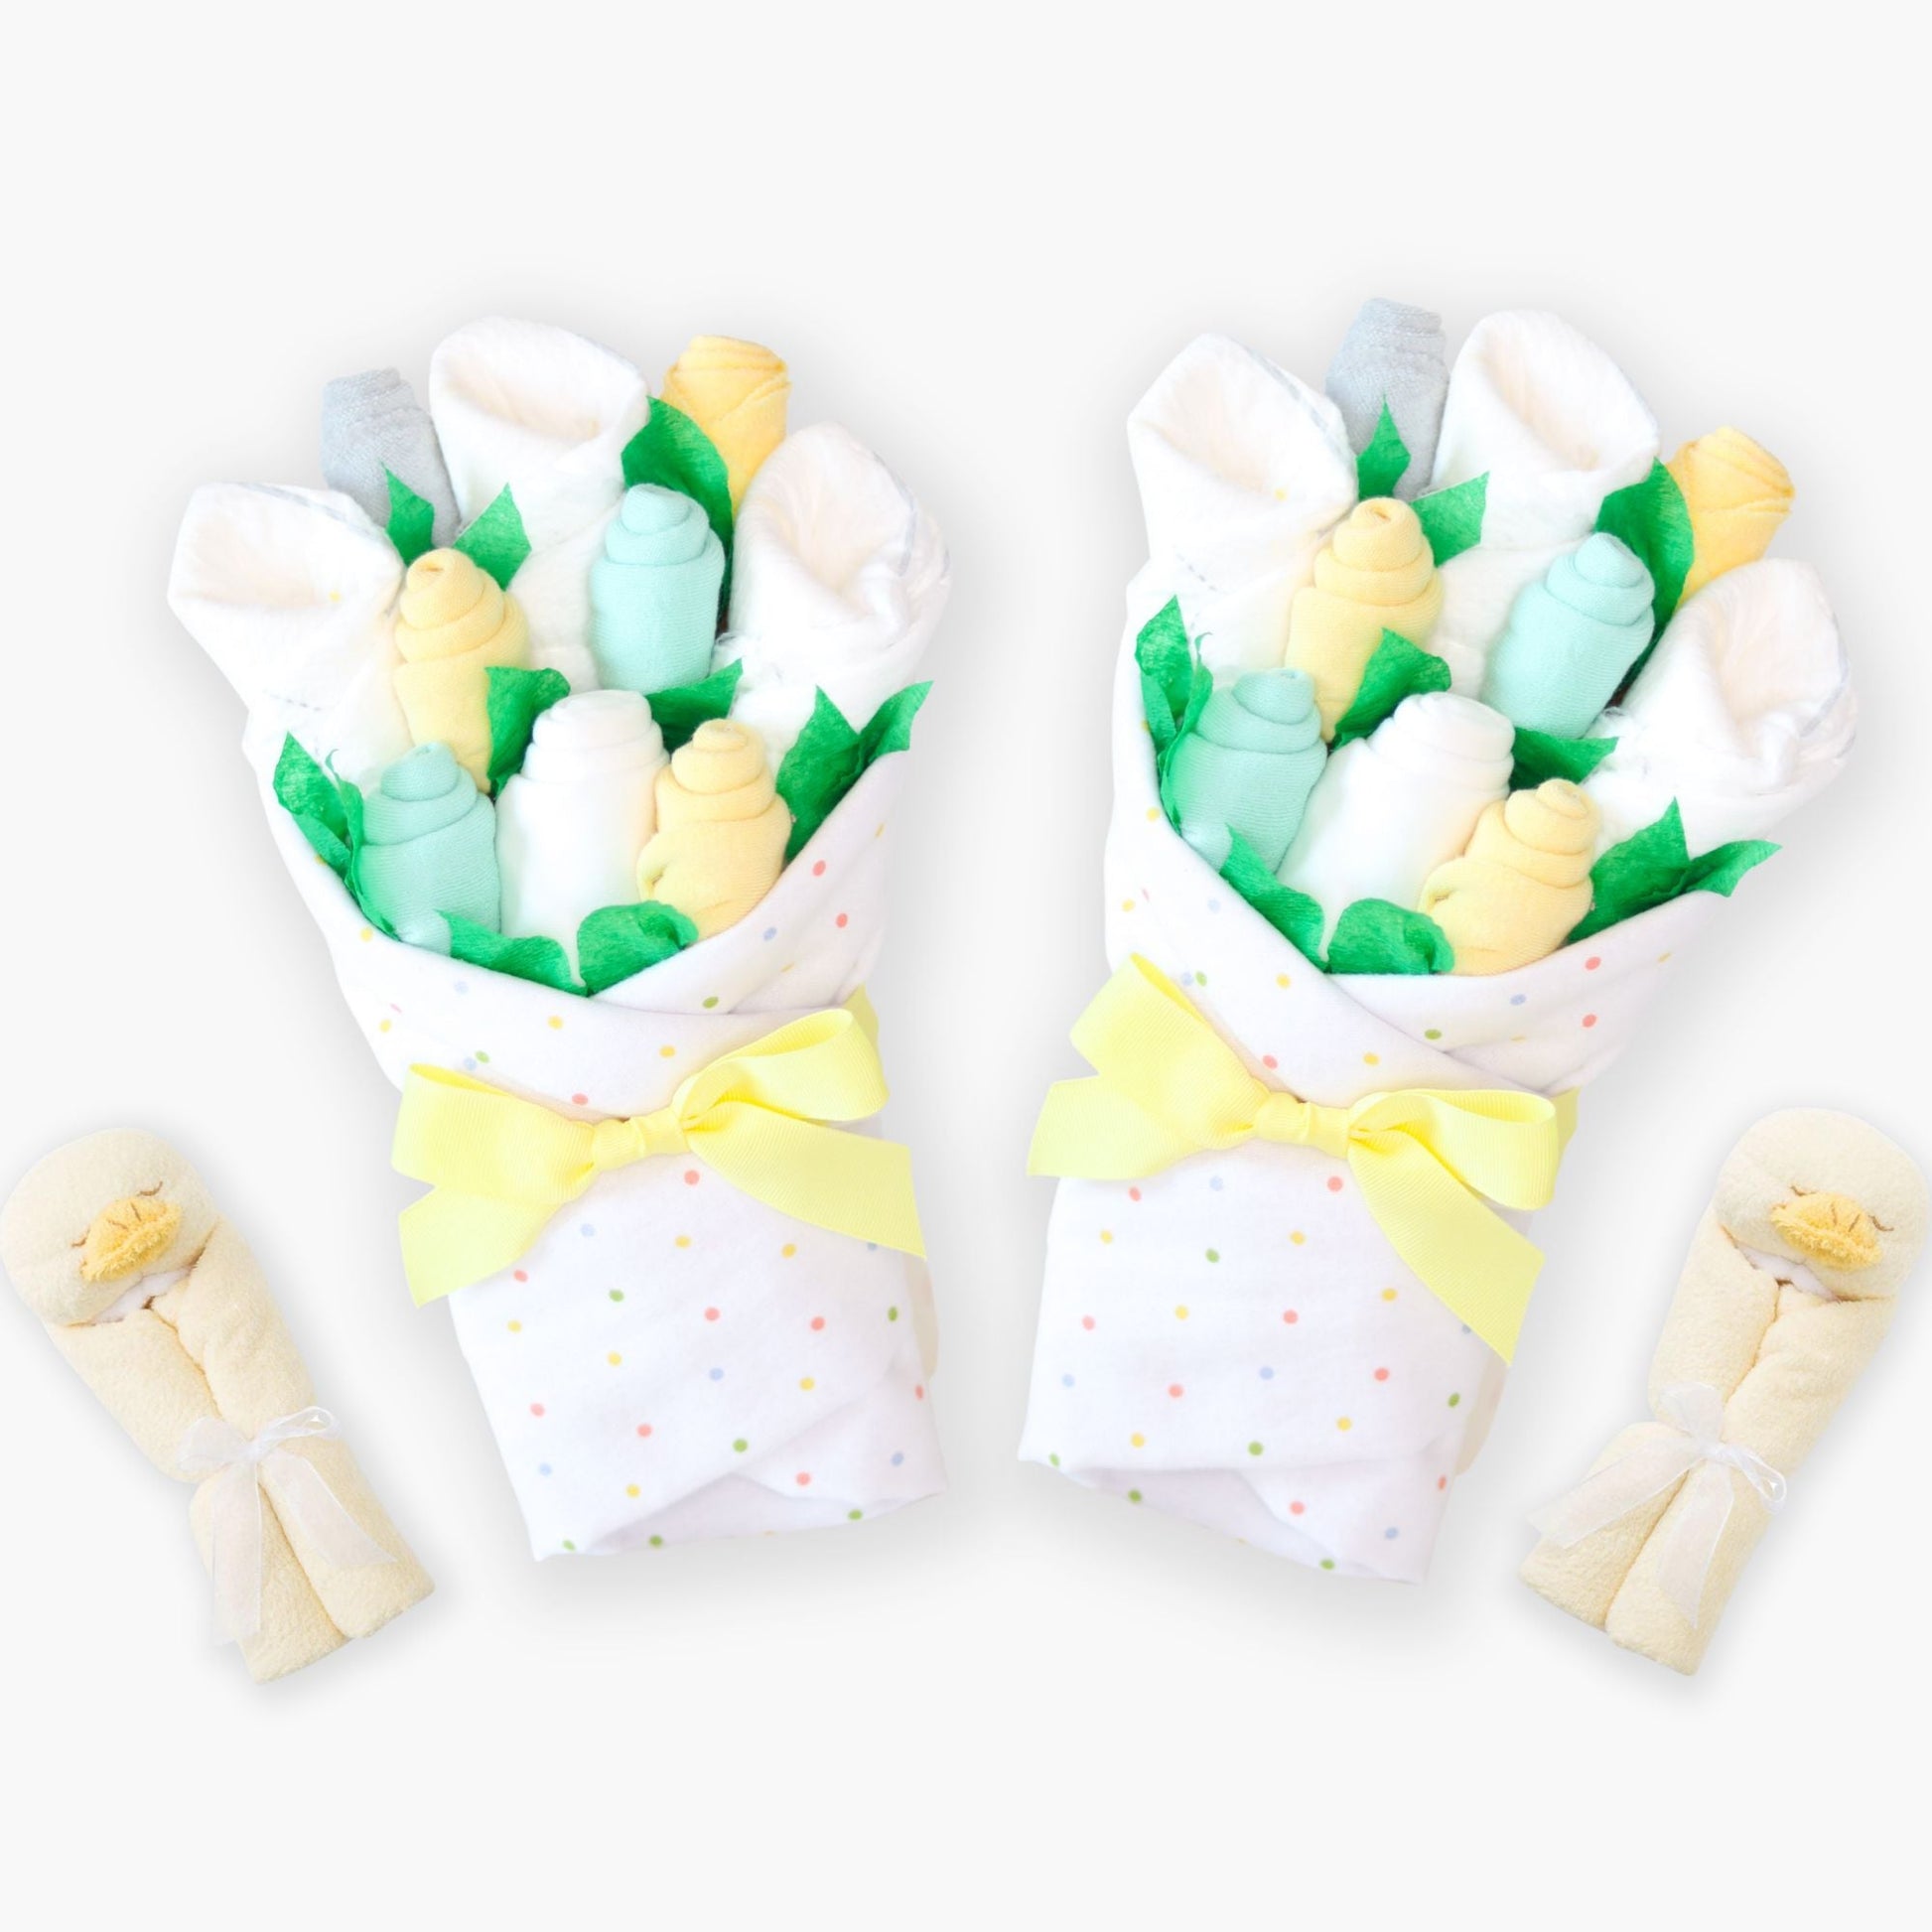 Twin Baby Gift Set - Bouquets & Lovey Blanket - Baby Blossom Company